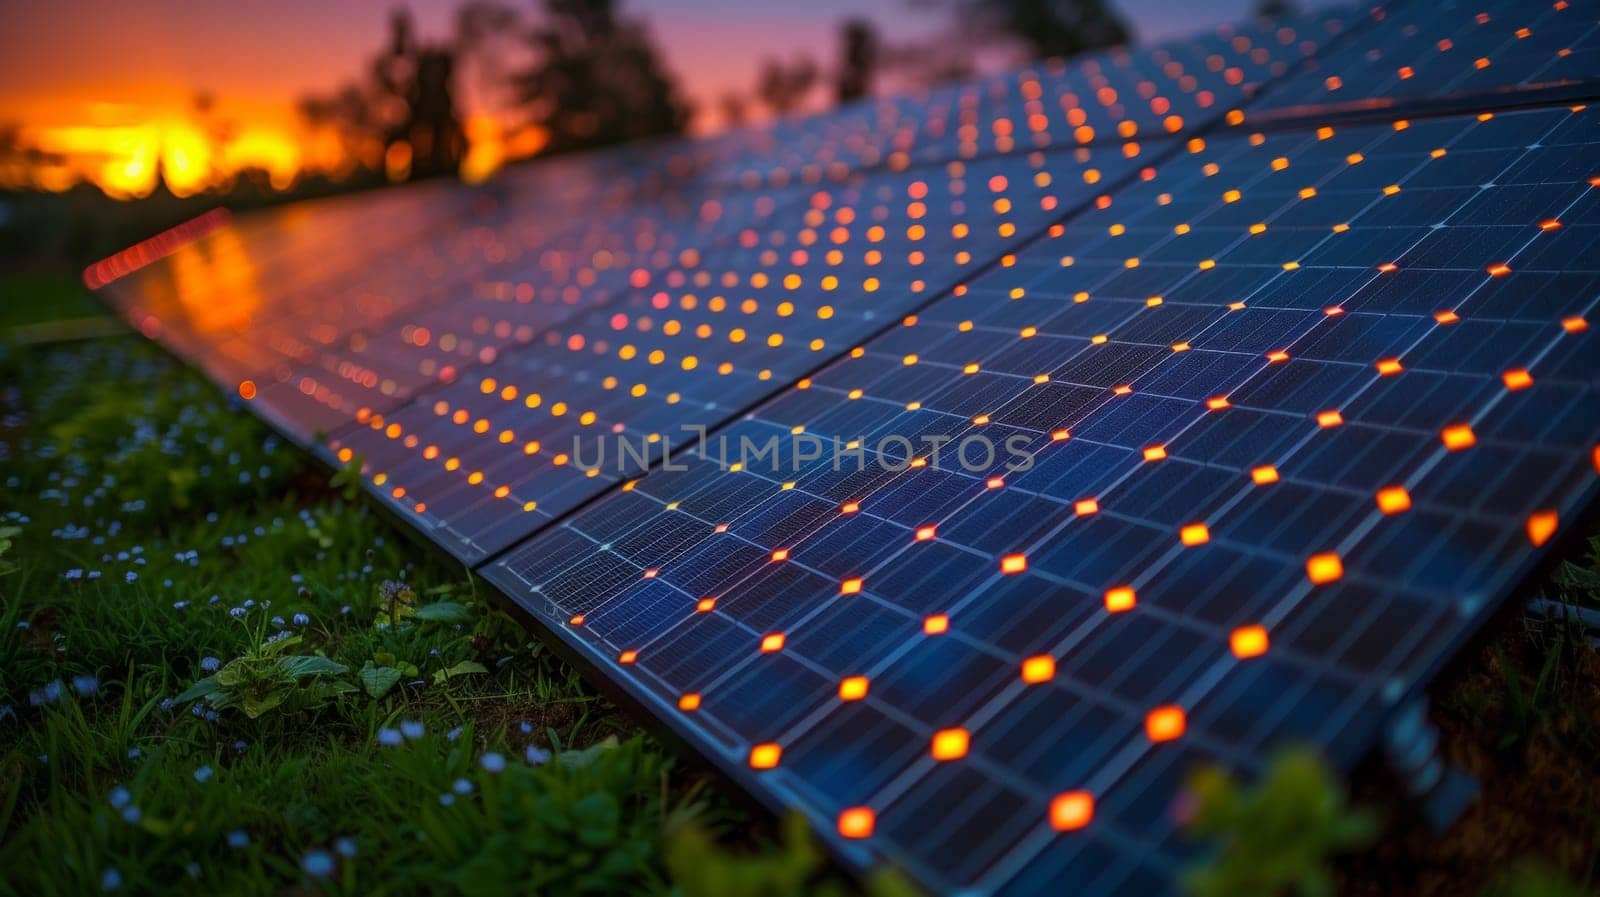 A solar panel with lights on it in the evening